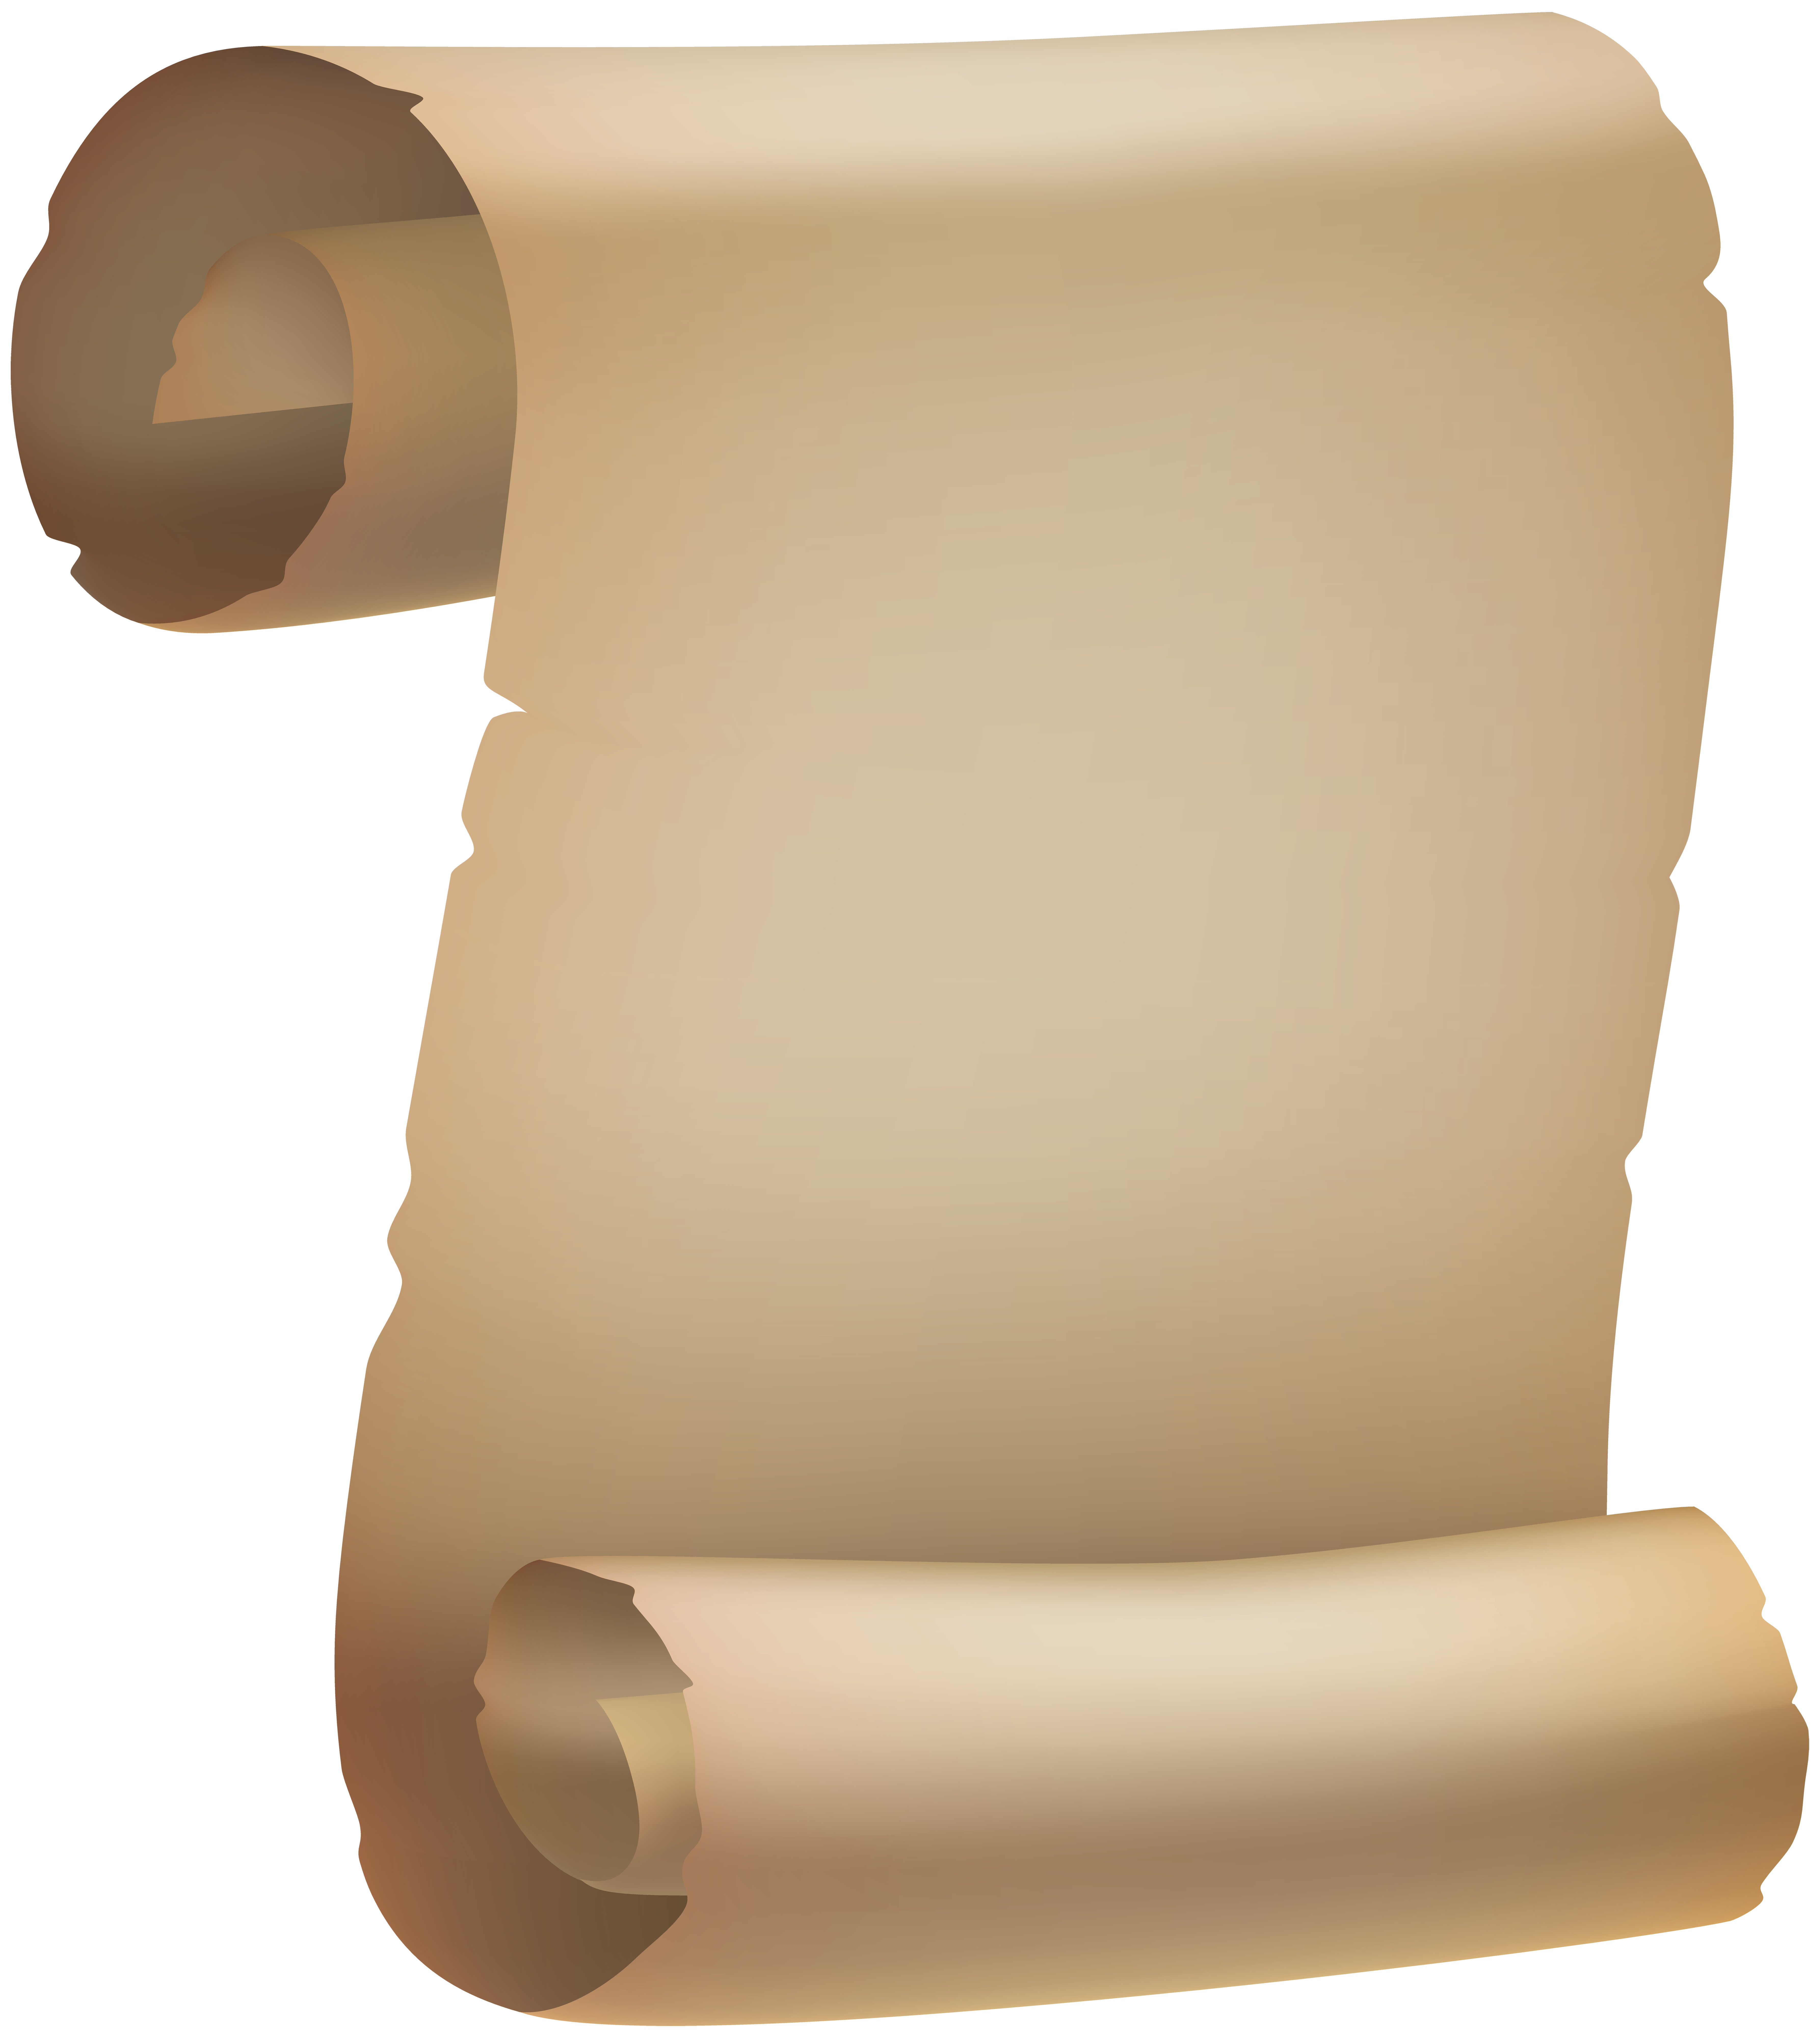 Ancient Scroll PNG Transparent Images Free Download